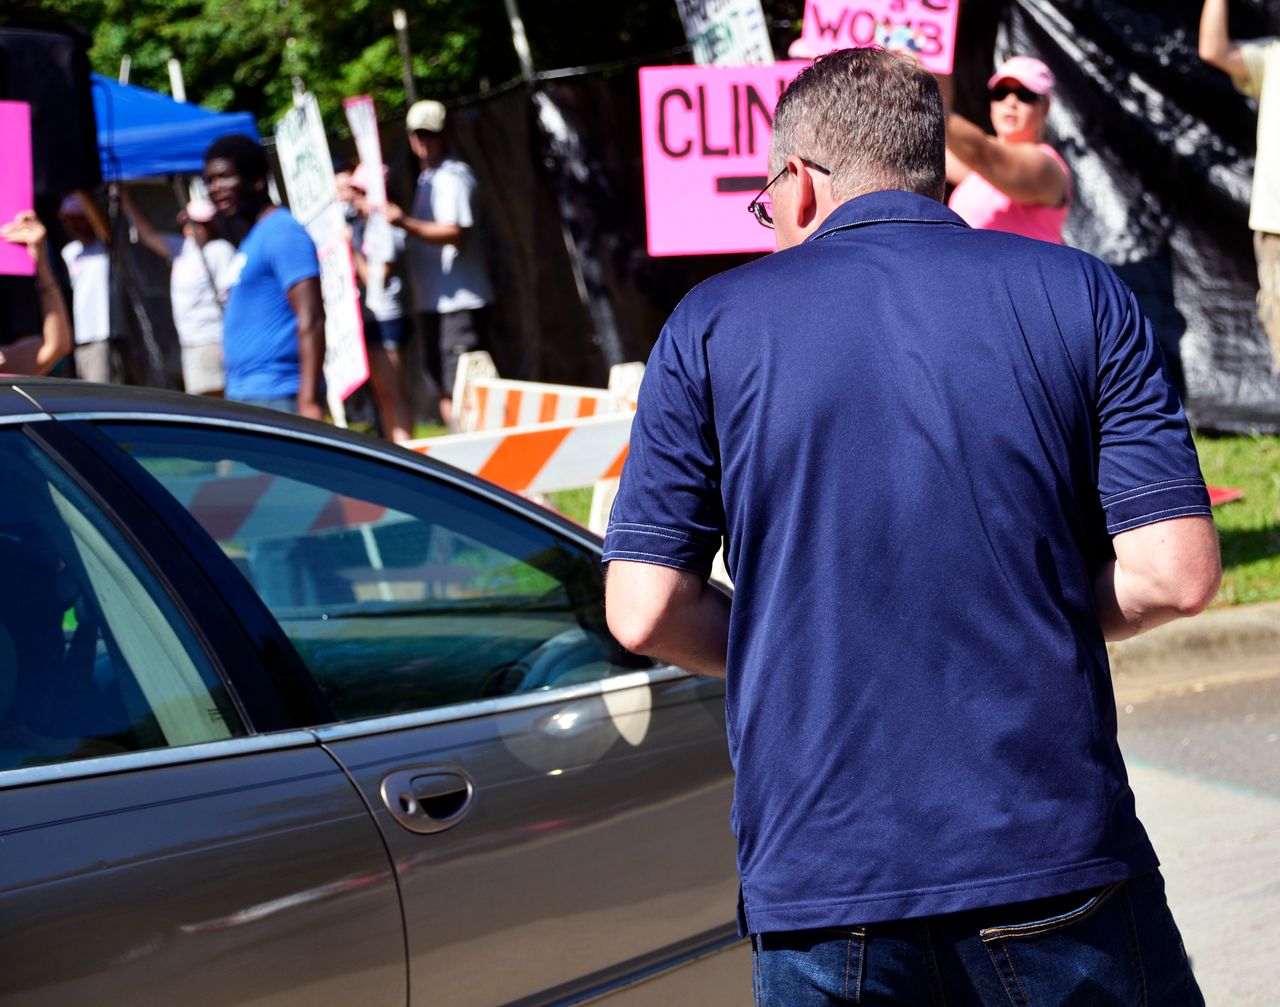 An anti-abortion protester from Cities4Life attempts to engage with a patient outside the center.